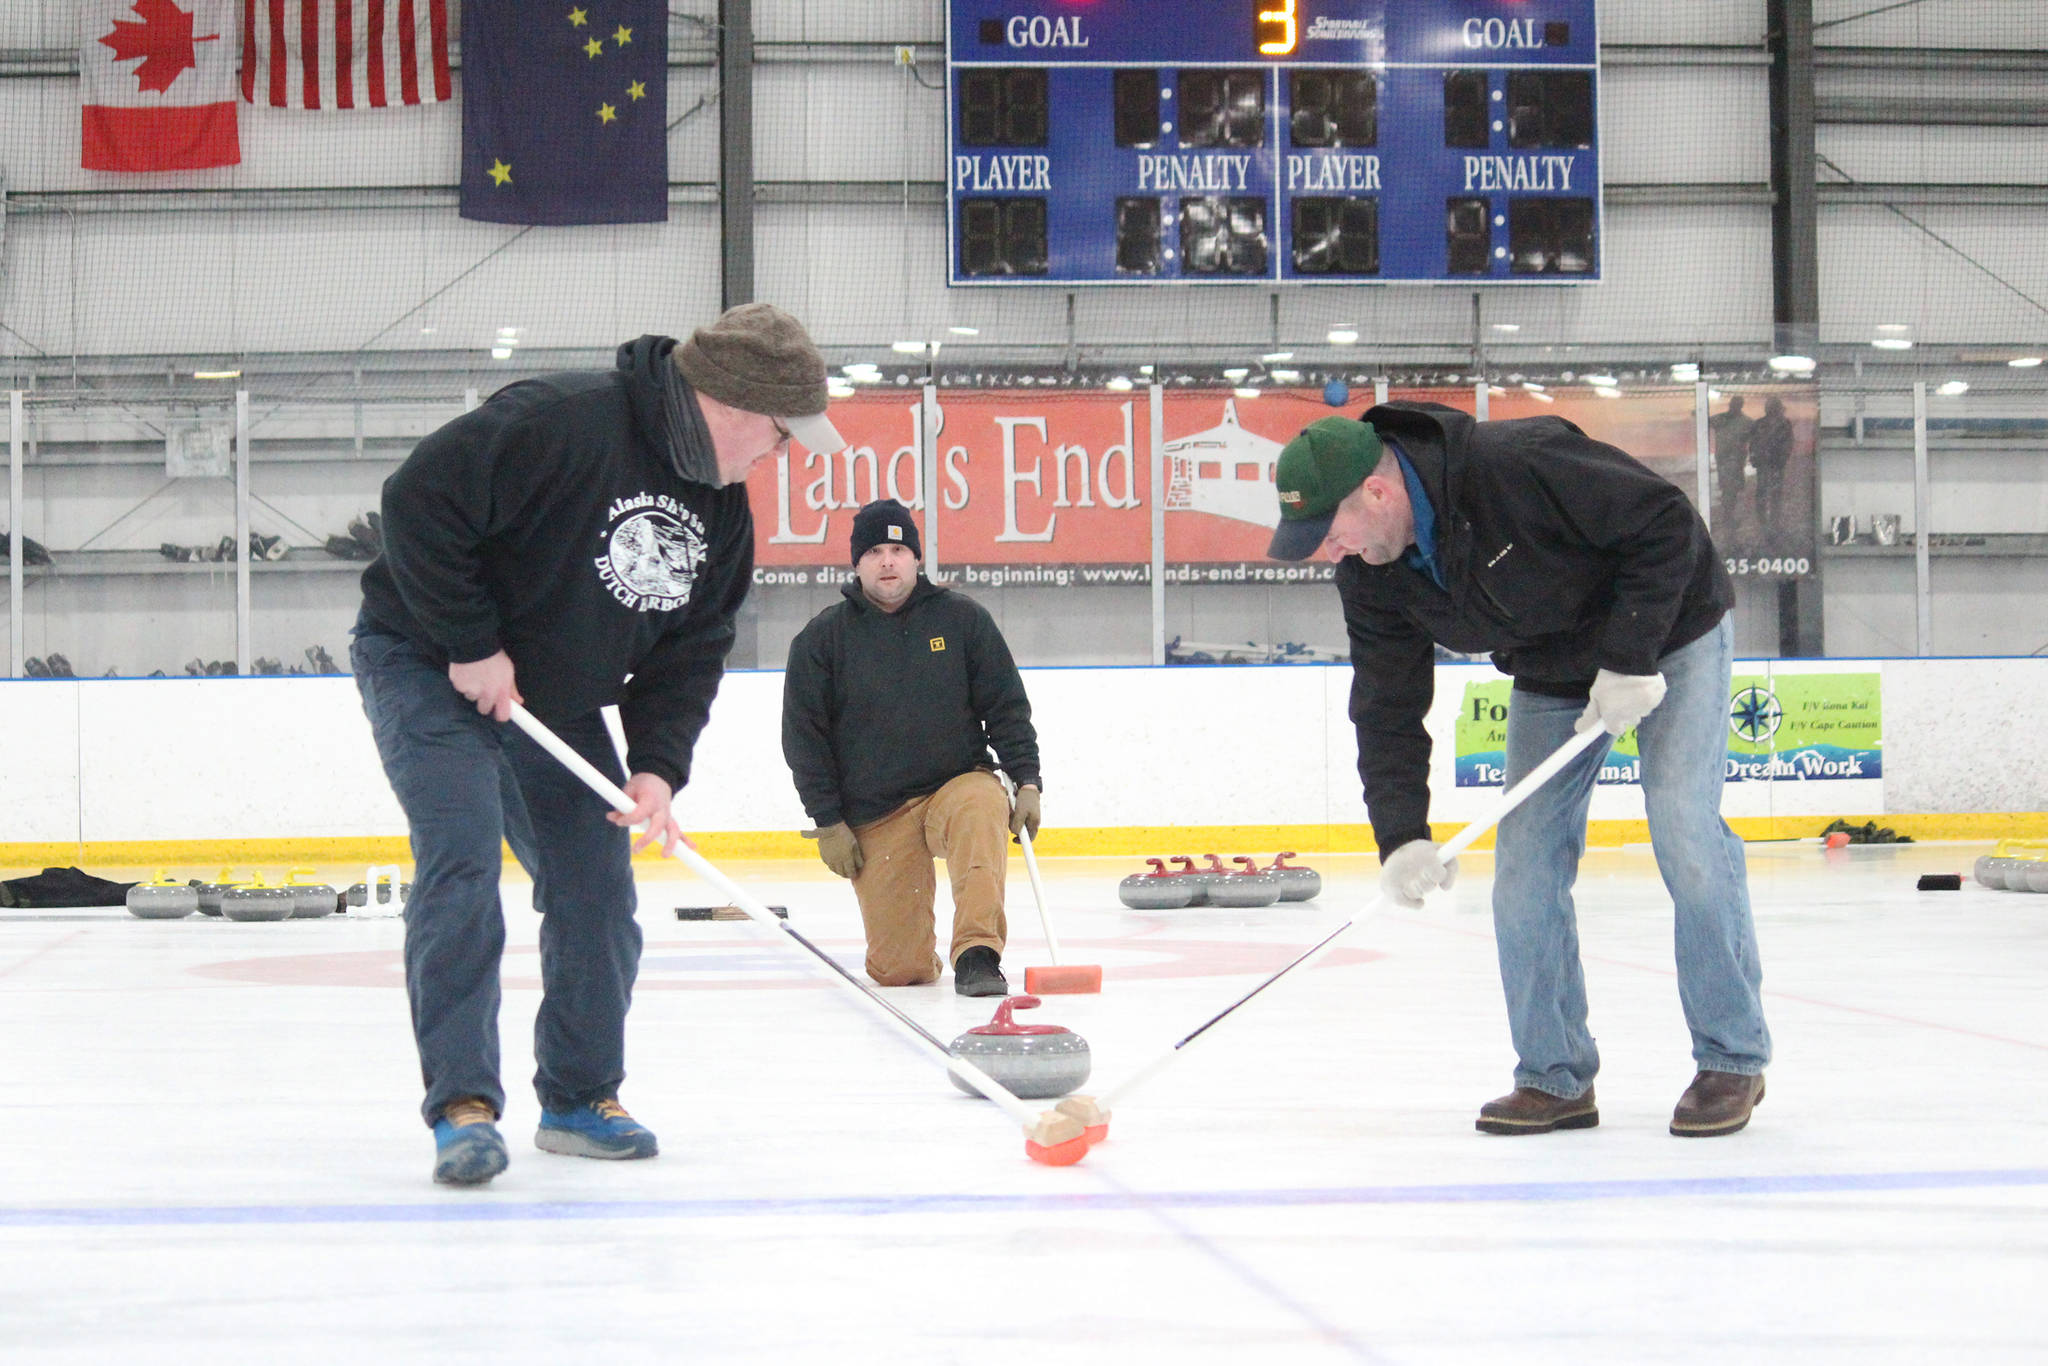 Mike Kozloski (left), Chuck Bowman (center) and Steve Nelzen work together to deliver and sweep a curling stone during a Learn to Curl fundraiser event for the Homer Curling Club on Saturday, Jan. 12, 2019 at the Kevin Bell Arena in Homer, Alaska. The clinic was taught by former Olympic curler Jessica Schultz. (Photo by Megan Pacer/Homer News)